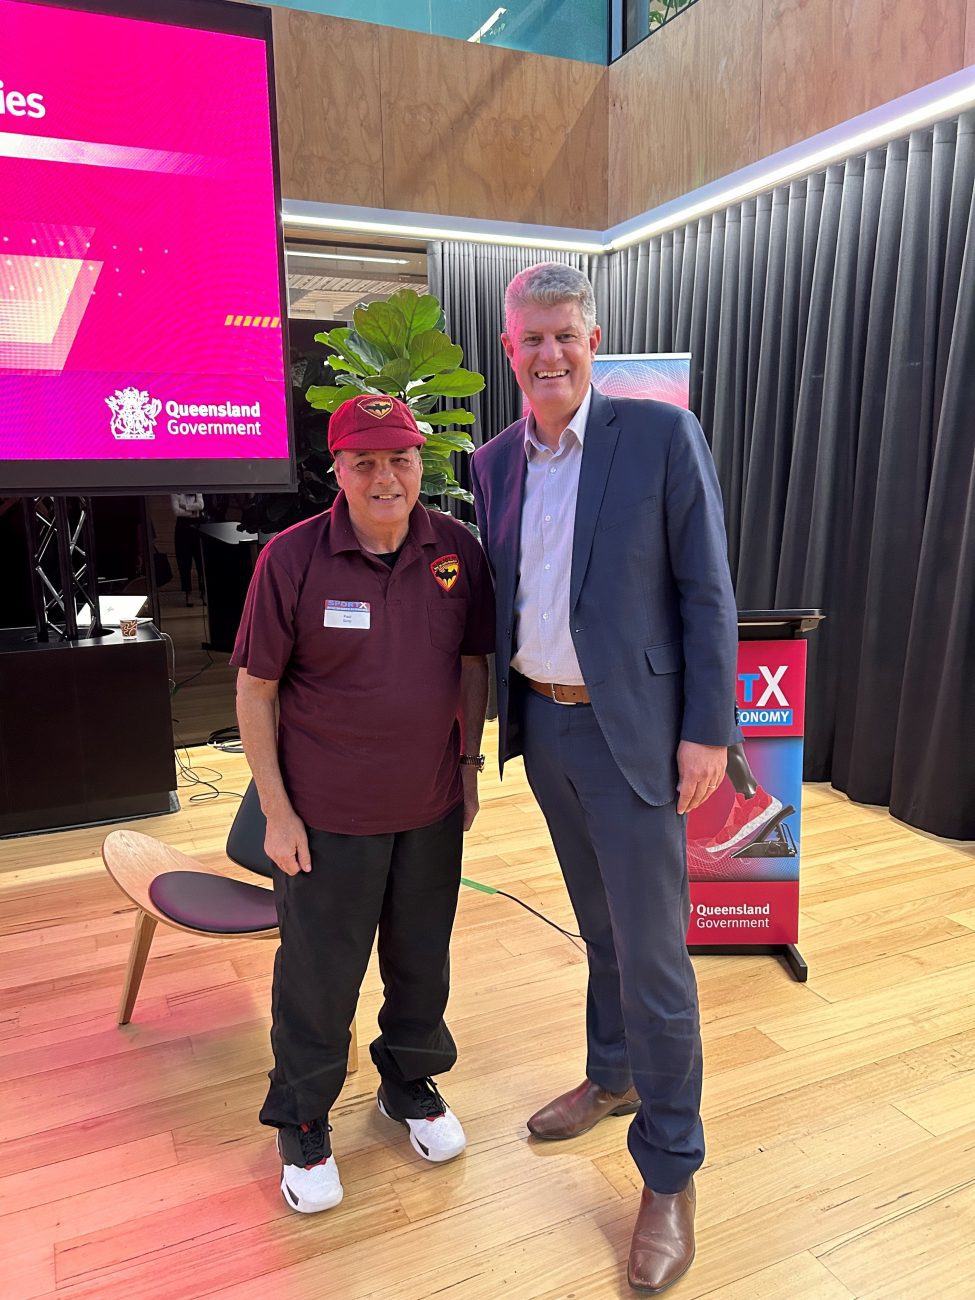 President Paul Szep and Sports Minister Stirling Hinchcliffe at SportX 2023. Paul wearing his Bats Uniform standing with Stirling in a suit.